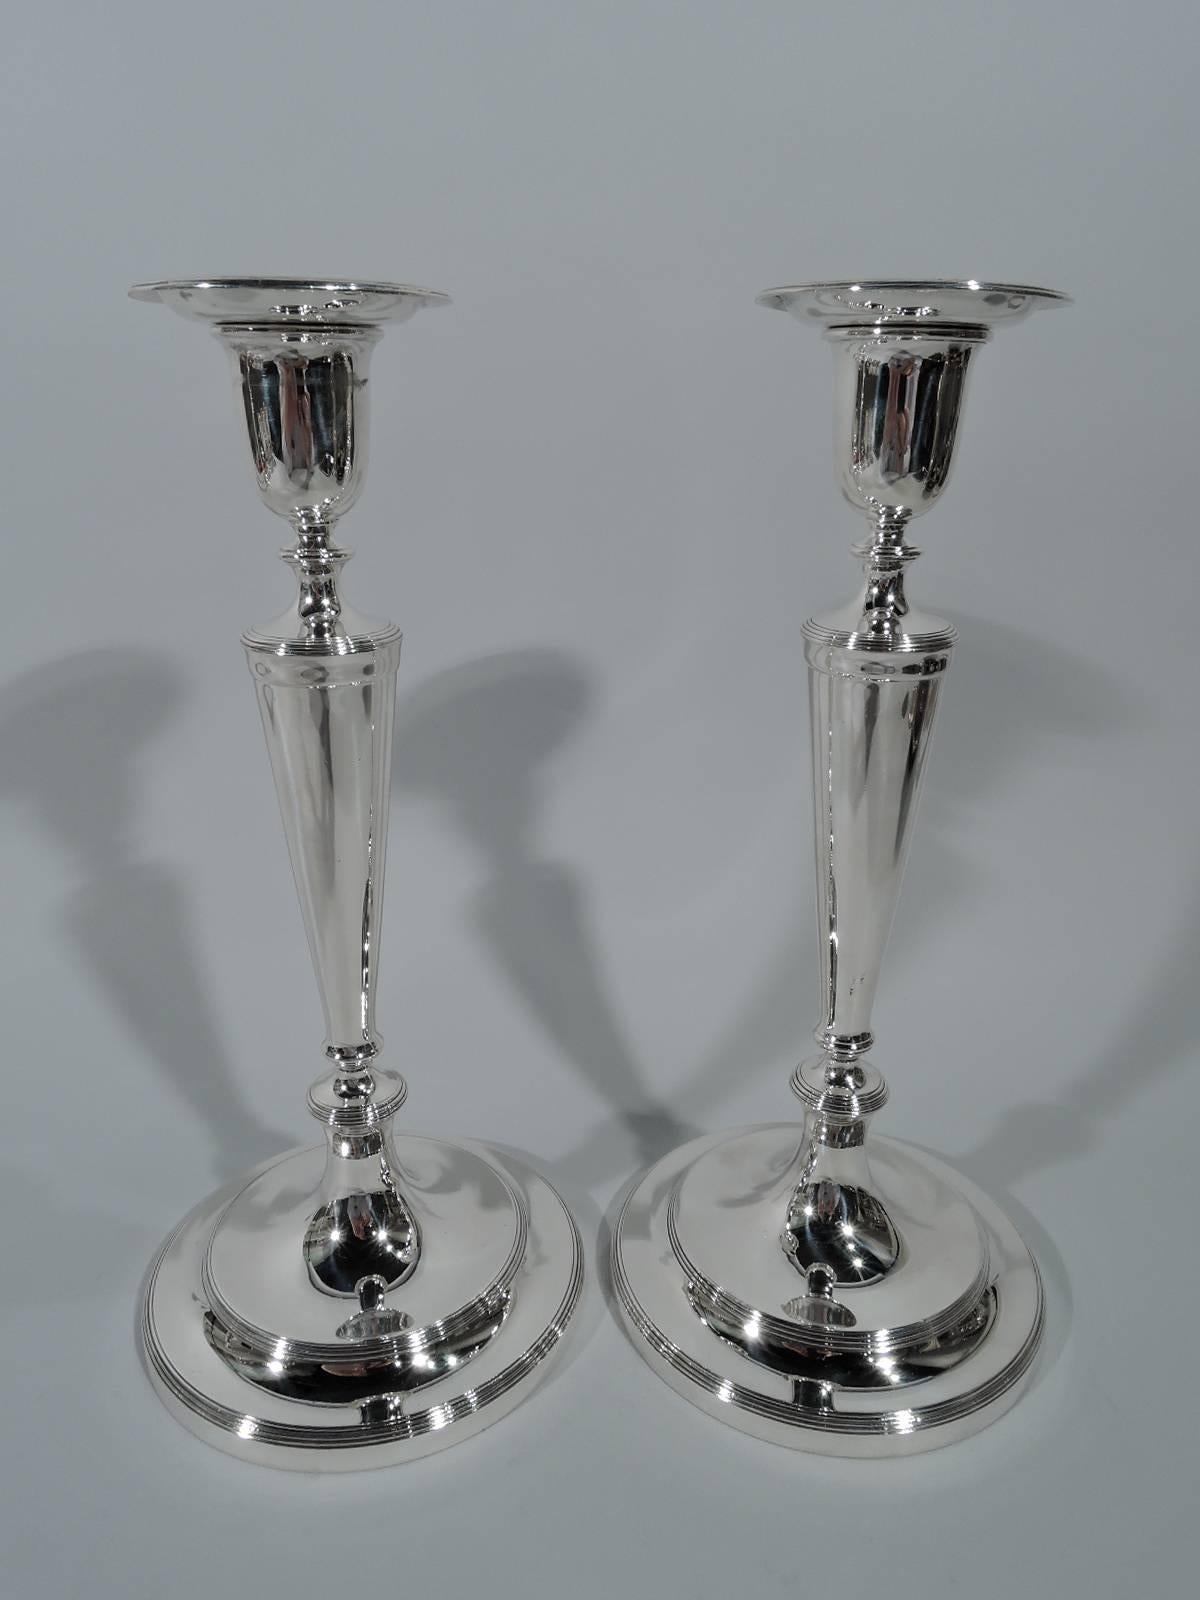 Four Edwardian Classical sterling silver candlesticks. Made by Tiffany & Co. in New York. Urn socket with detachable bobeche, tapering columnar shaft, knops, and stepped foot. Spare form embellished with reeding. An elegant set that works on both